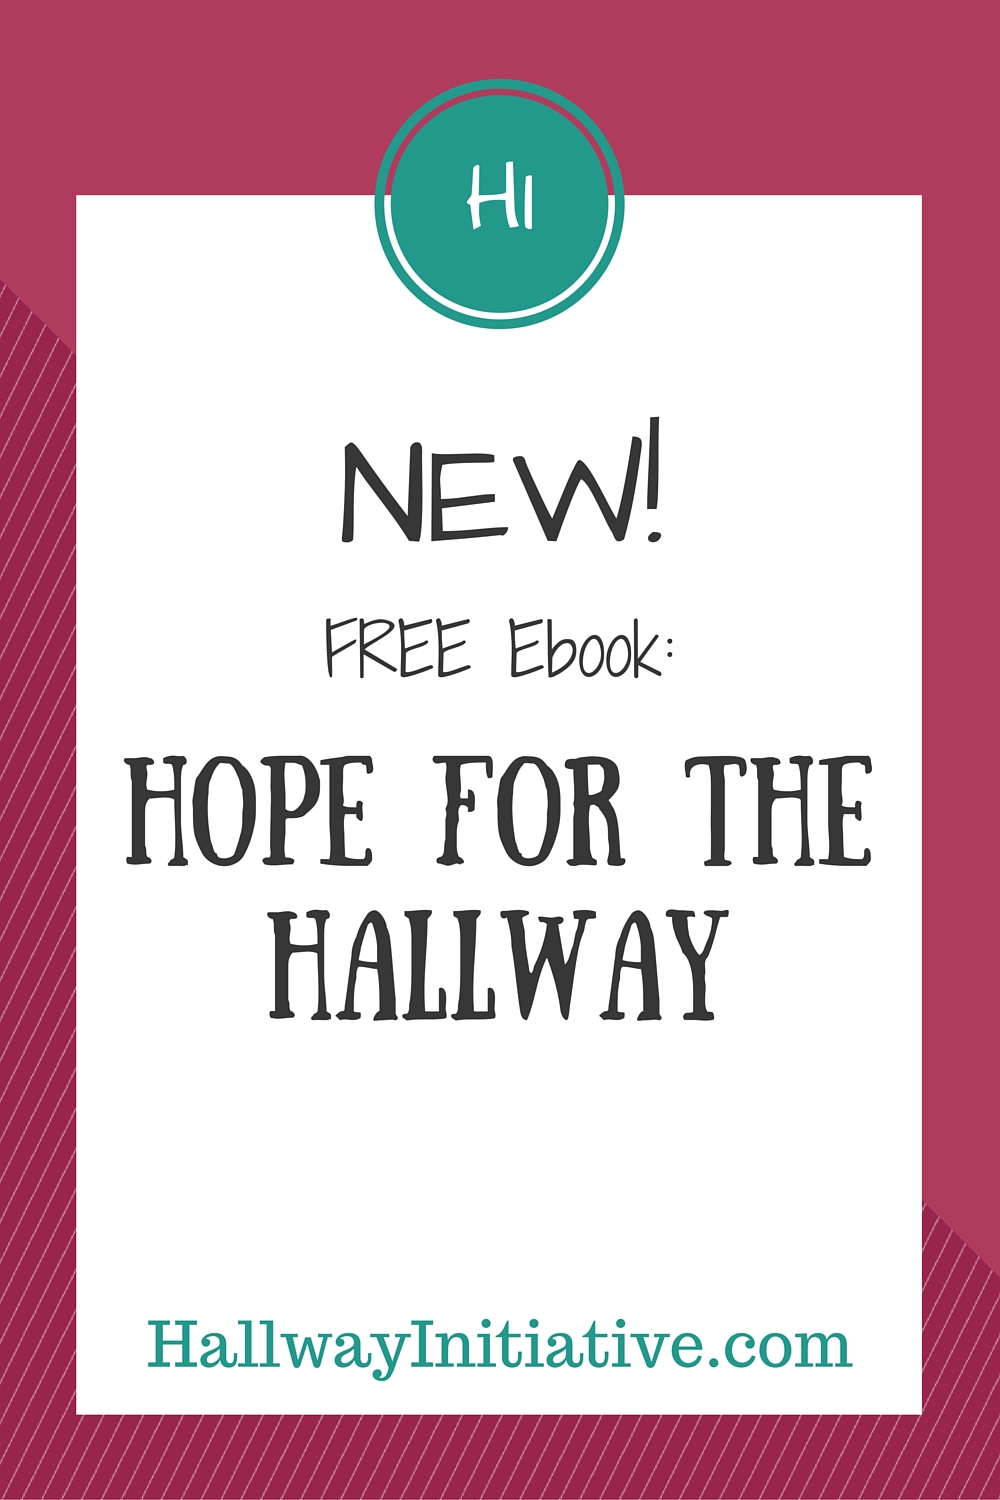 NEW! Free ebook: Hope for the Hallway